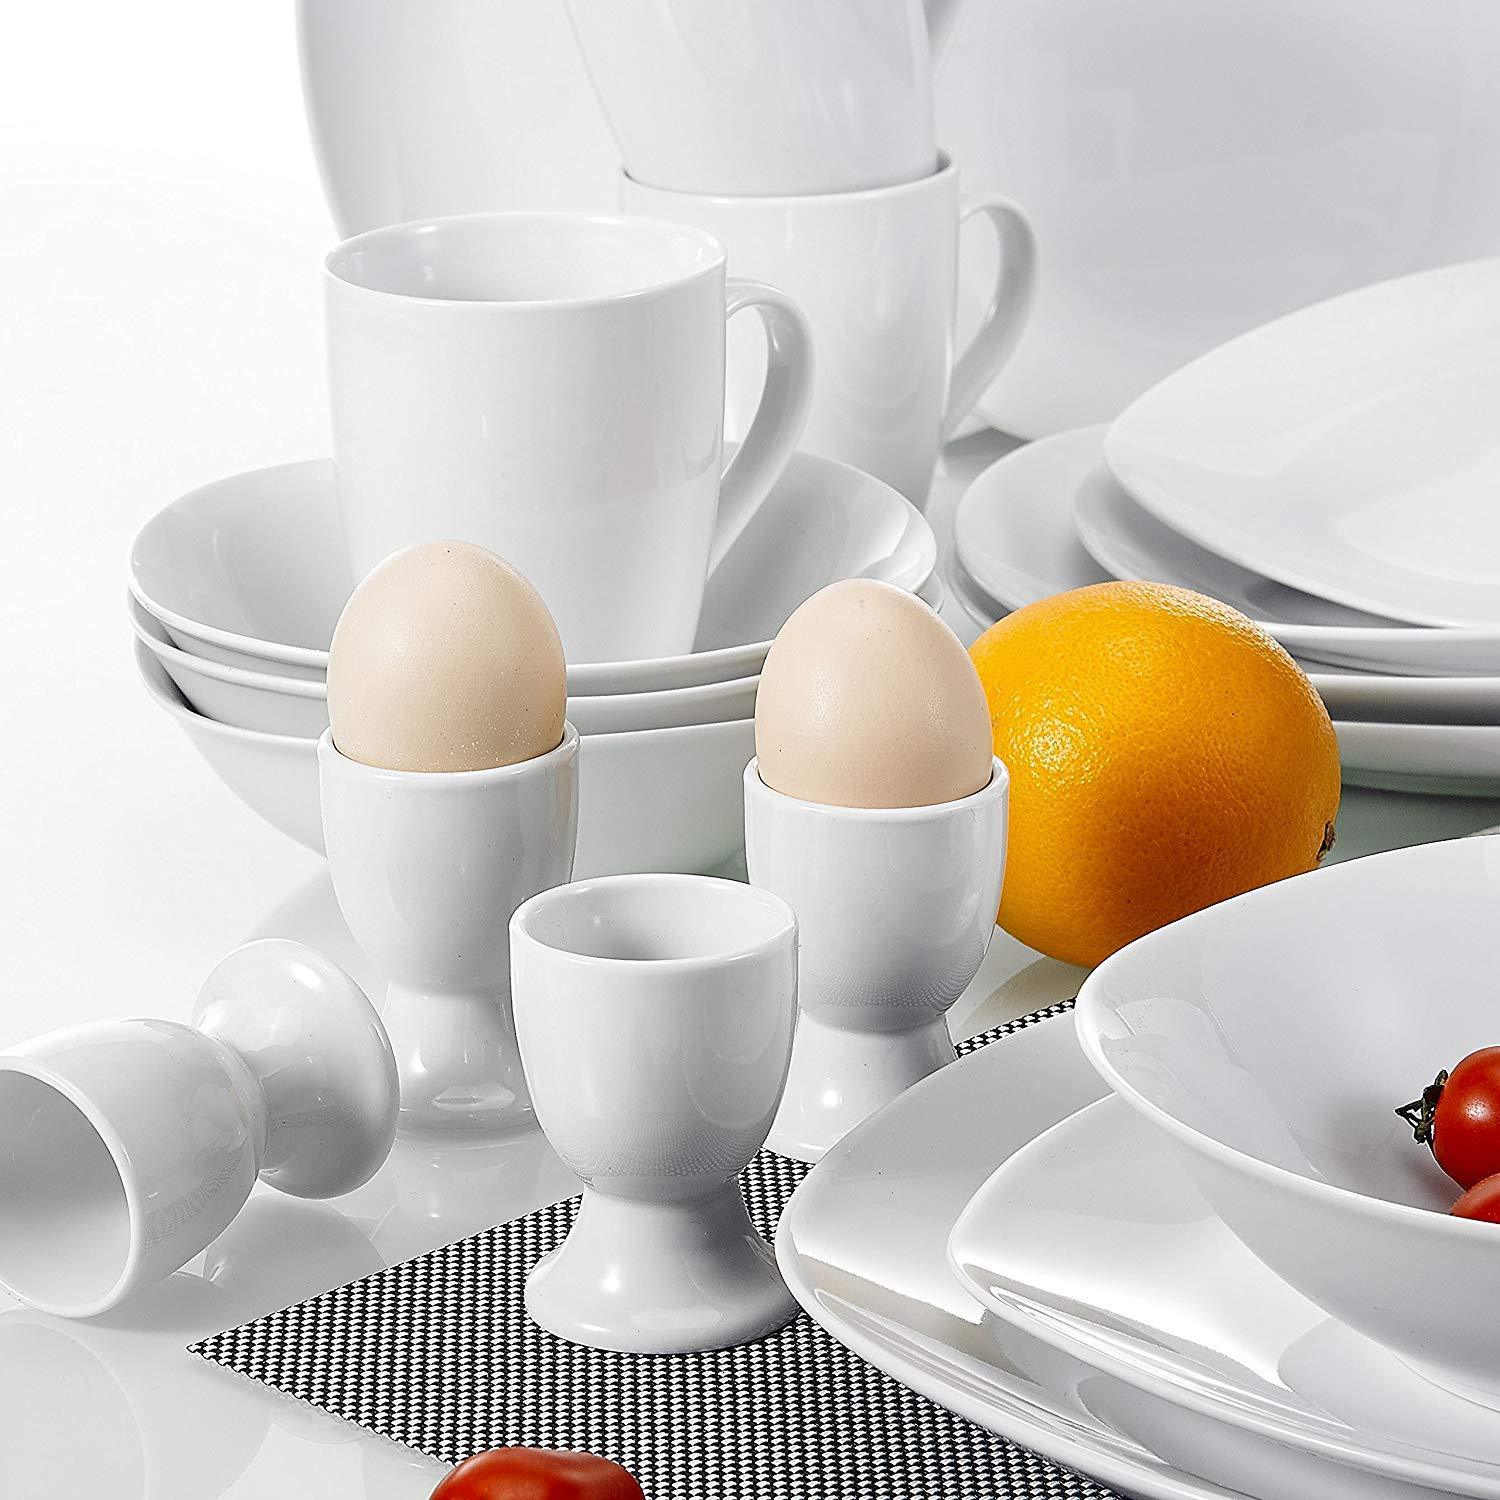 Elisa 40-Piece Porcelain Dinnerware Set with Dinner Plates Soup Bowl Dessert Plate Cups Egg Stand Cup Service for 8 - Nordic Side - 40, Bowl, Cup, Cups, Dessert, Dinner, Dinnerware, Egg, Elis